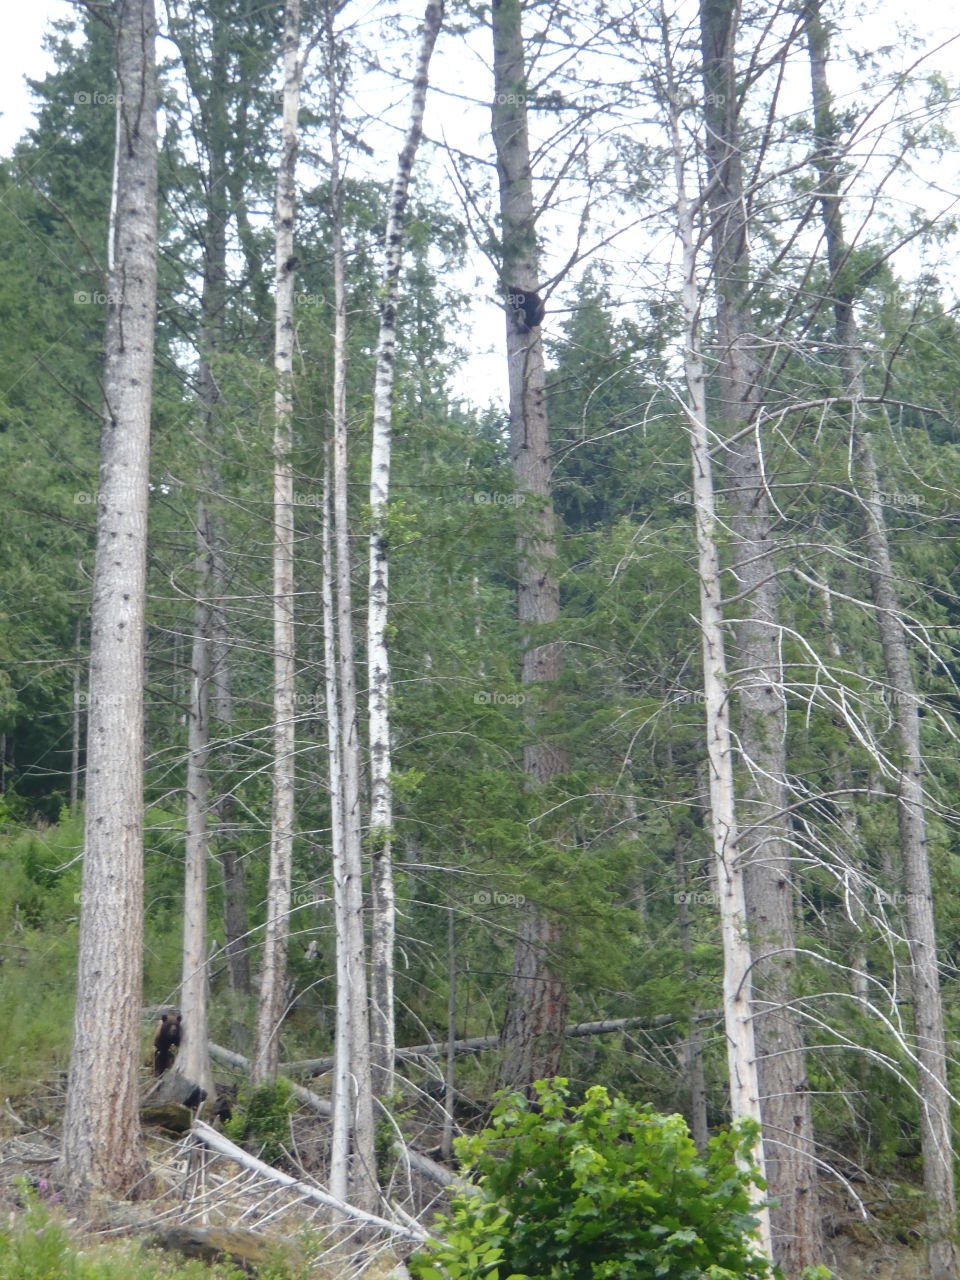 Black bear in British Columbia Canada in a tree and another mama bear on the ground 